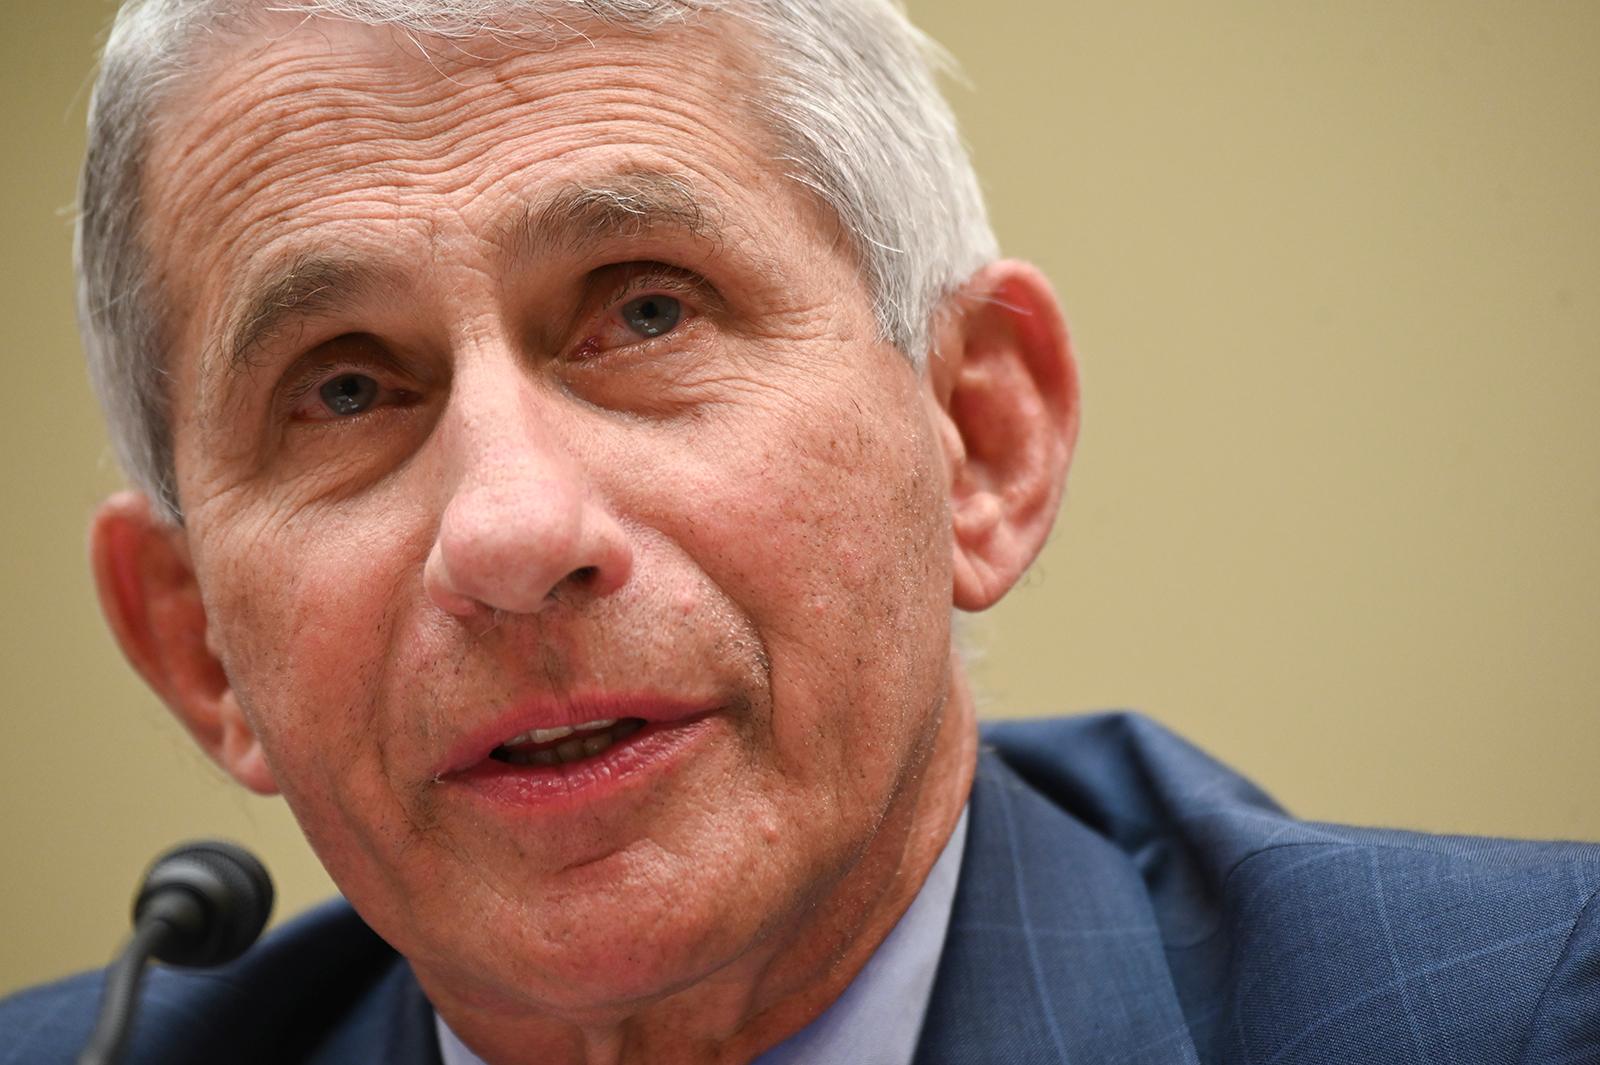 Dr. Anthony Fauci, director of the National Institute of Allergy and Infectious Diseases, testifies during a House Select Subcommittee on the Coronavirus Crisis hearing in Washington, DC on July 31.